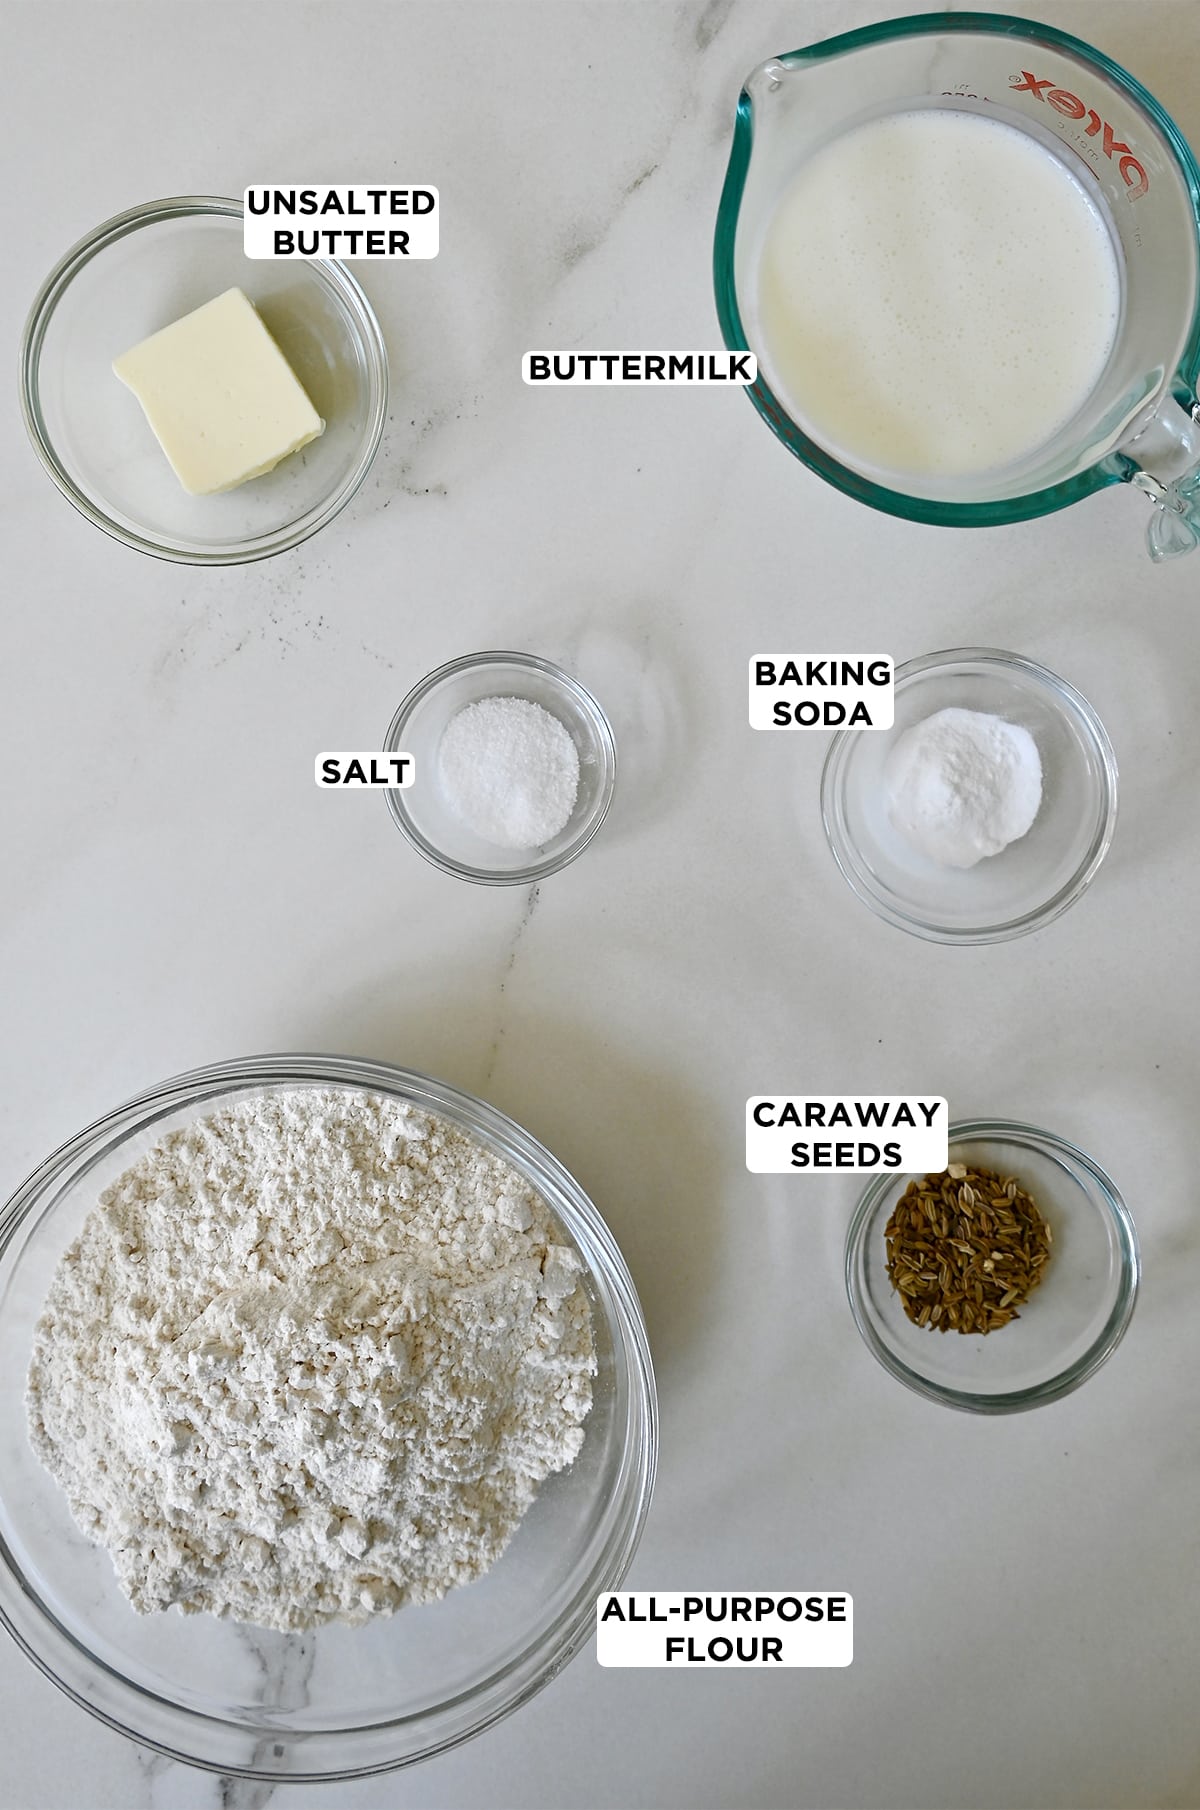 Various sizes of glass bowls containing the ingredients needed to make soda bread, including butter, buttermilk, baking soda, salt, caraway seeds and all-purpose flour.